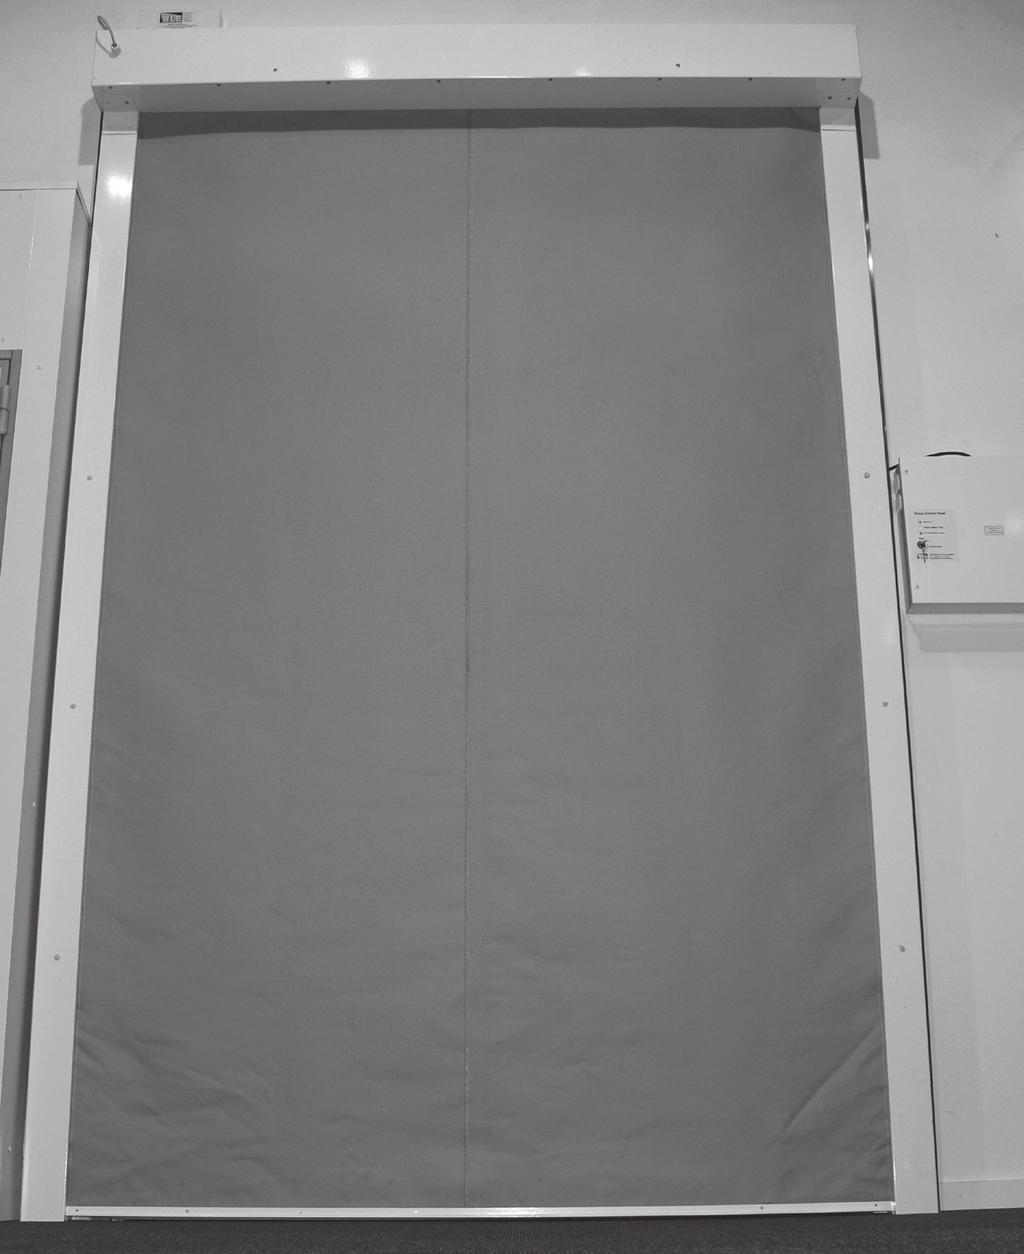 Fire curtain, E120-120 minutes TECHNICAL SPECIFICATIONS: DIMENSIONS Max. W 25 m x H 10 m.